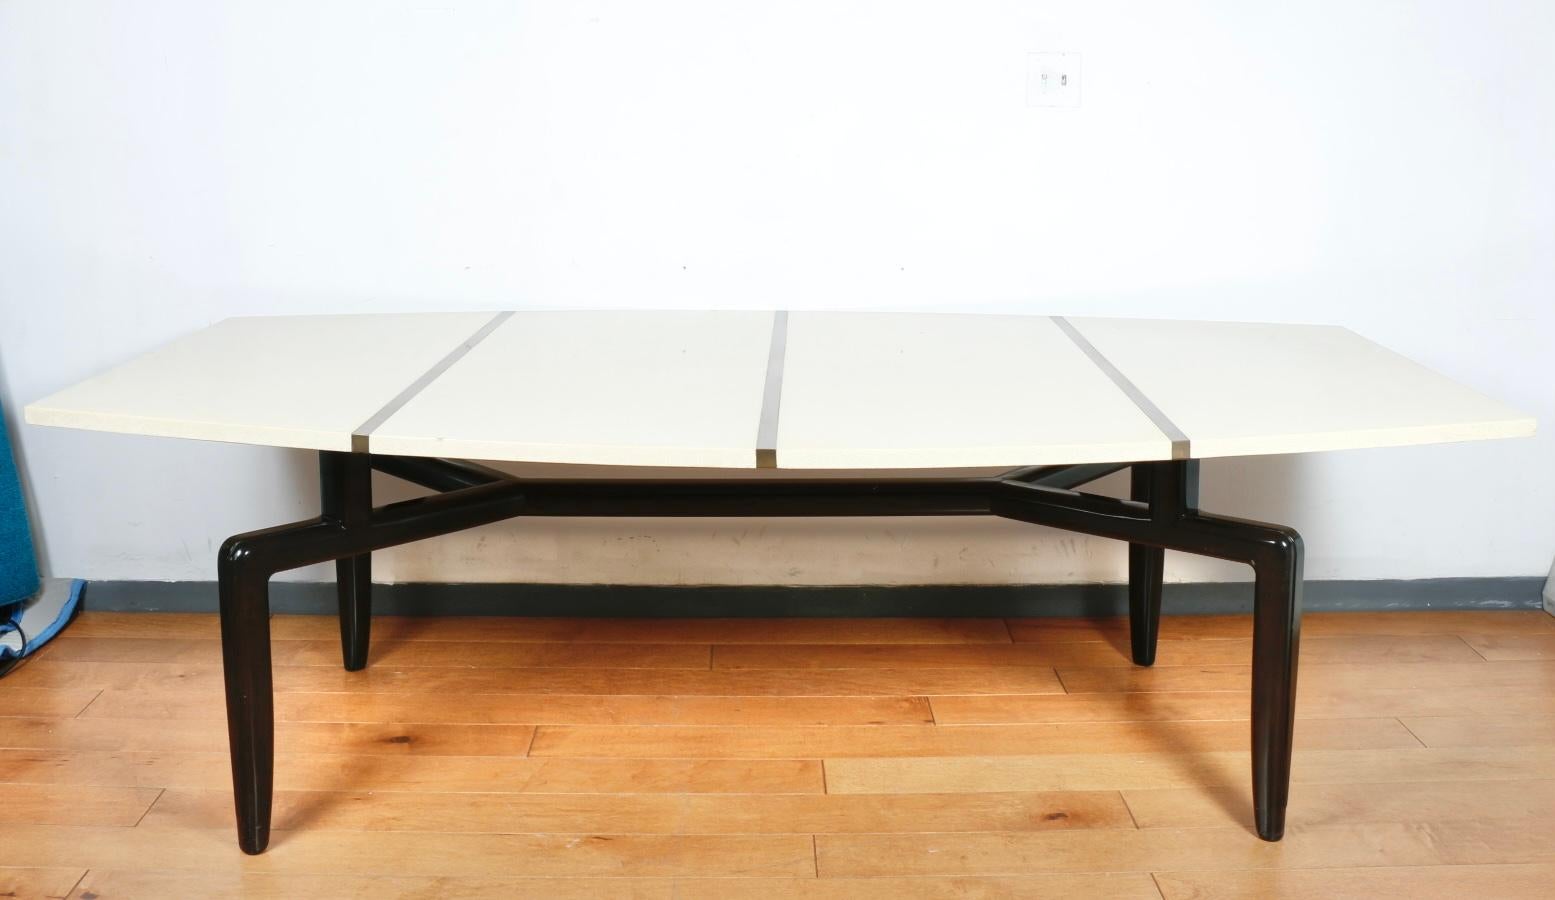 Large 2 piece dining or conference table in good vintage used condition. Great design on the base and top. Minimal signs of use. Top is very heavy and large.